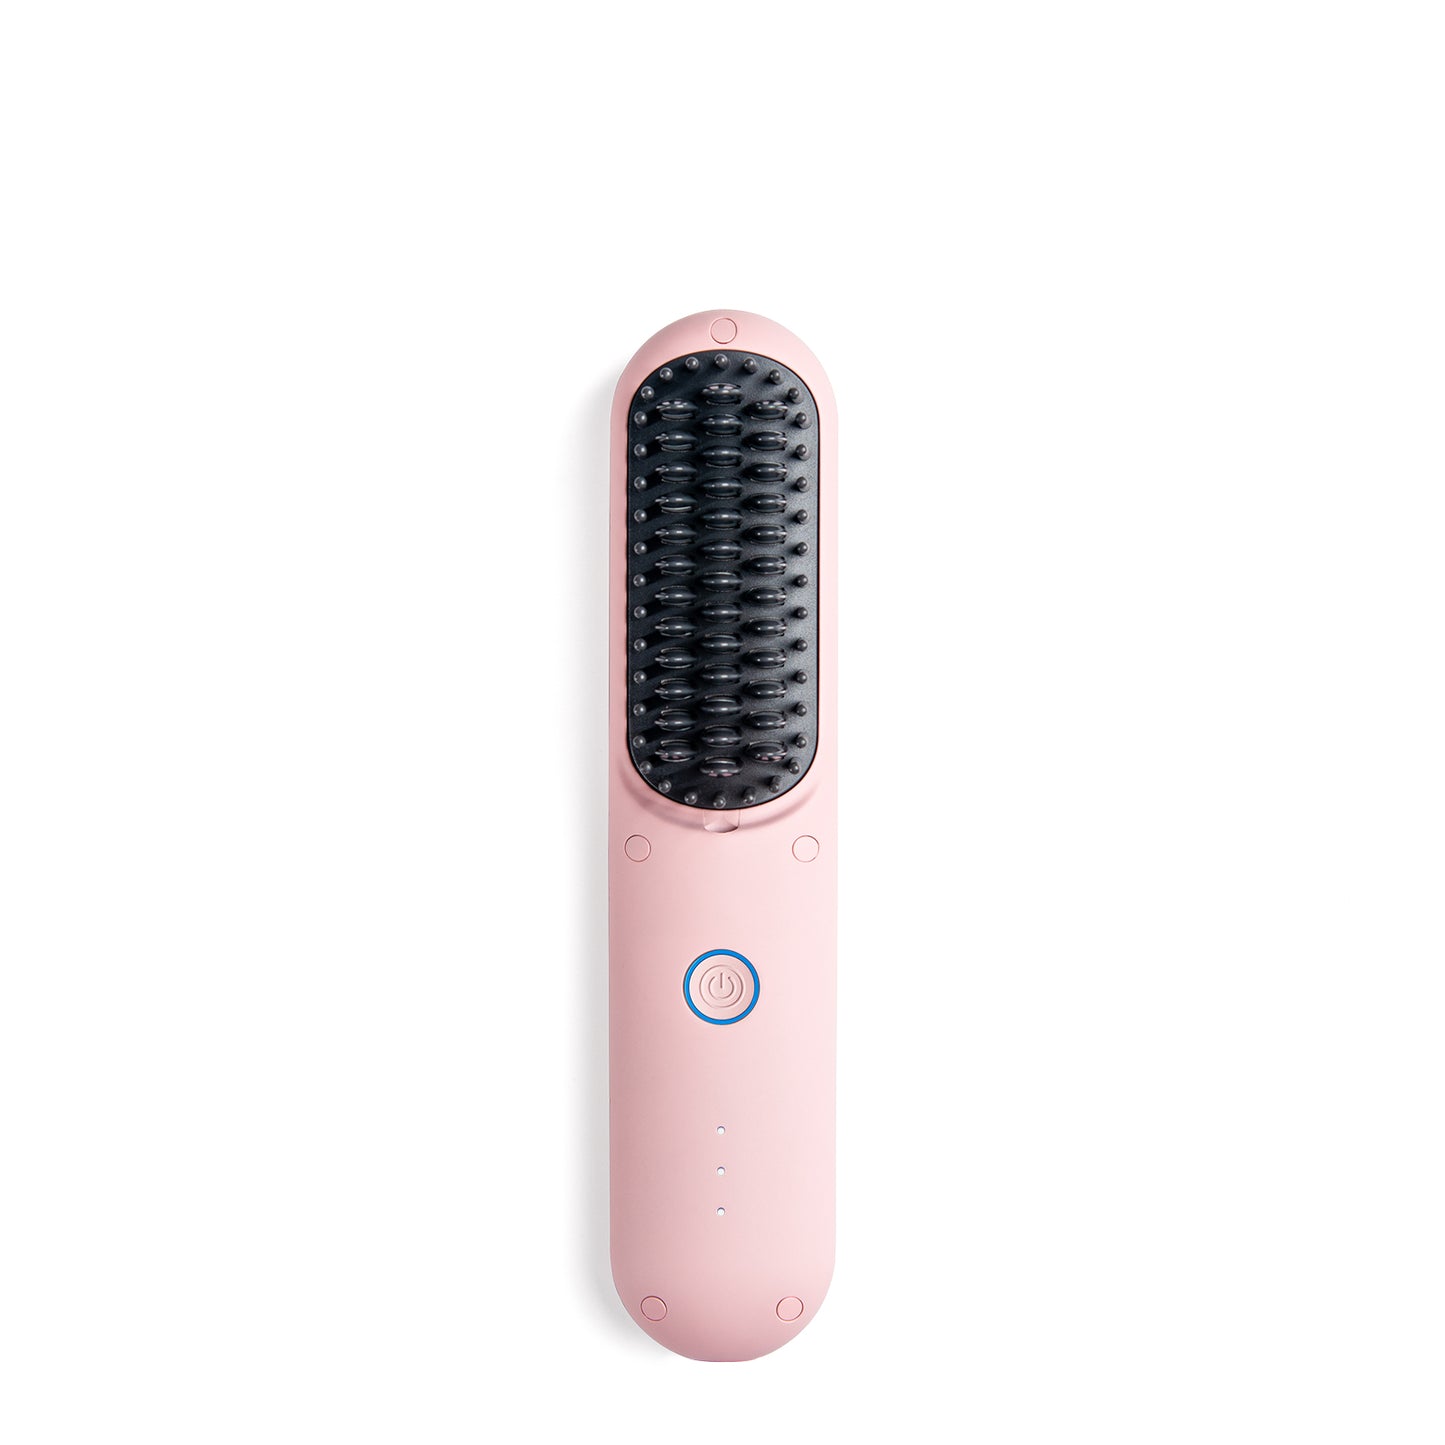 TYMO PORTA PINK hair straightener in wireless design, featuring a sleek pink color and user-friendly controls.